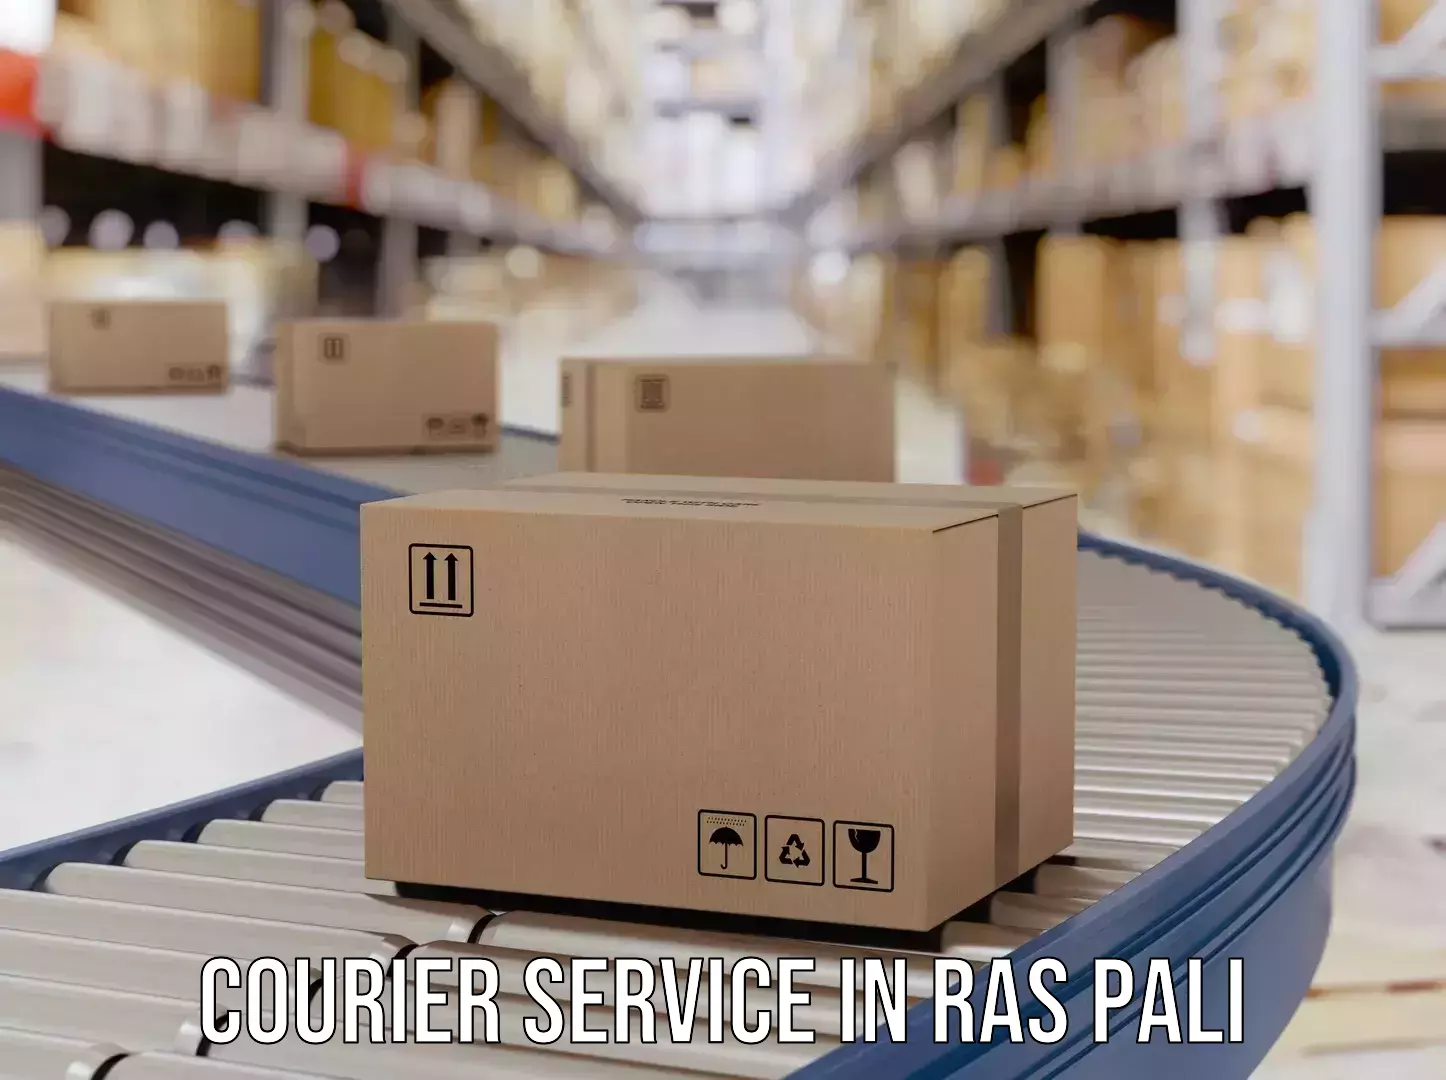 Advanced parcel tracking in Ras Pali